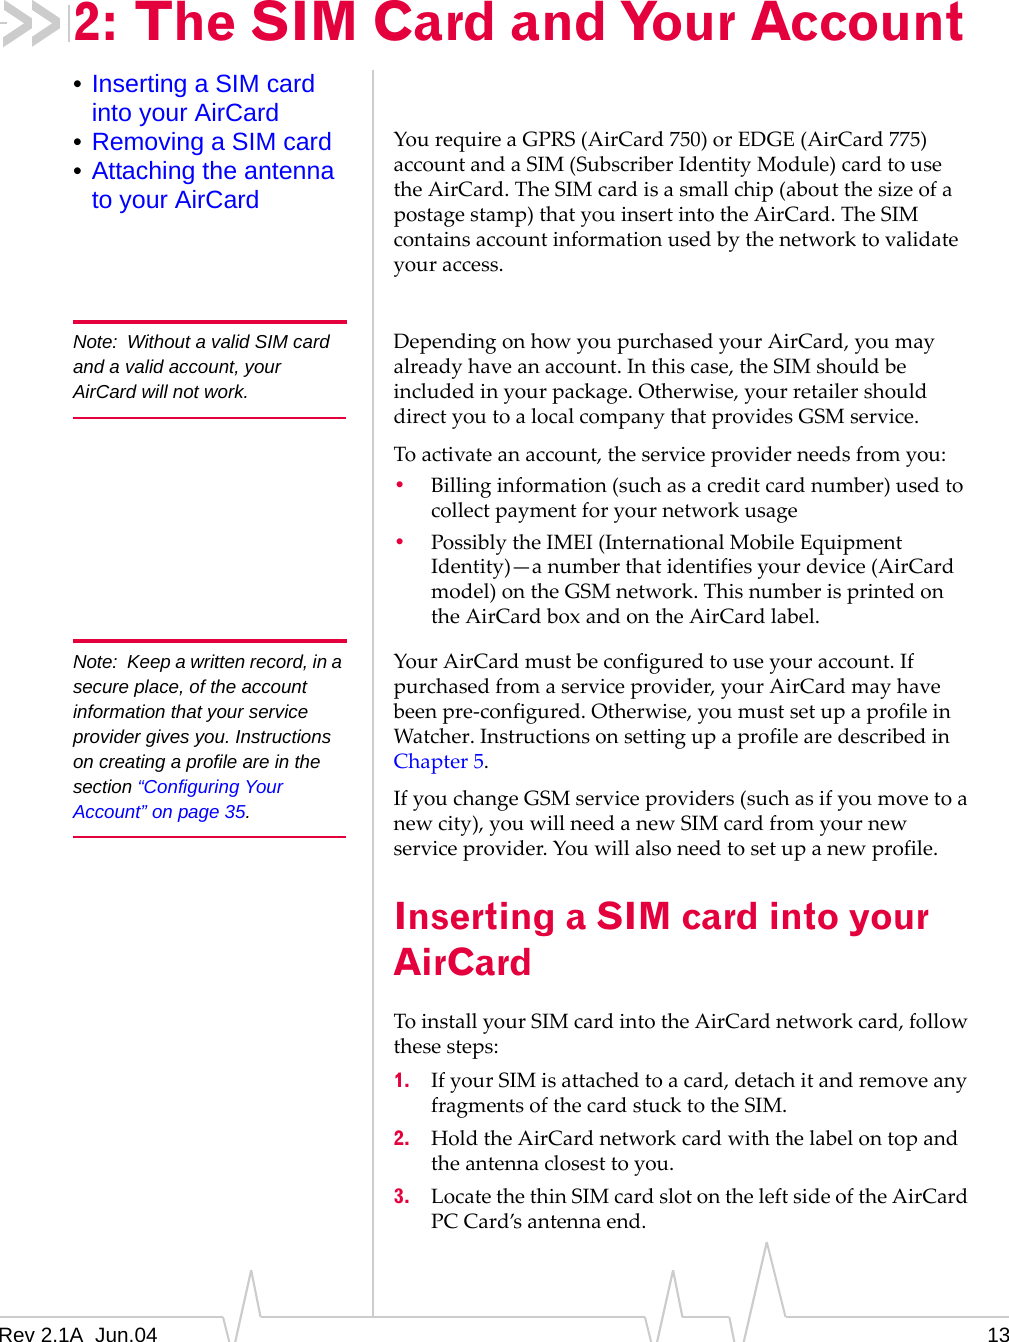 Rev 2.1A  Jun.04 132: The SIM Card and Your Account•Inserting a SIM card into your AirCard•Removing a SIM card•Attaching the antenna to your AirCardYou require a GPRS (AirCard 750) or EDGE (AirCard 775) account and a SIM (Subscriber Identity Module) card to use the AirCard. The SIM card is a small chip (about the size of a postage stamp) that you insert into the AirCard. The SIM contains account information used by the network to validate your access. Note: Without a valid SIM card and a valid account, your AirCard will not work.Depending on how you purchased your AirCard, you may already have an account. In this case, the SIM should be included in your package. Otherwise, your retailer should direct you to a local company that provides GSM service.To activate an account, the service provider needs from you:•Billing information (such as a credit card number) used to collect payment for your network usage•Possibly the IMEI (International Mobile Equipment Identity)—a number that identifies your device (AirCard model) on the GSM network. This number is printed on the AirCard box and on the AirCard label.Note: Keep a written record, in a secure place, of the account information that your service provider gives you. Instructions on creating a profile are in the section “Configuring Your Account” on page 35.Your AirCard must be configured to use your account. If purchased from a service provider, your AirCard may have been pre-configured. Otherwise, you must set up a profile in Watcher. Instructions on setting up a profile are described in Chapter 5.If you change GSM service providers (such as if you move to a new city), you will need a new SIM card from your new service provider. You will also need to set up a new profile.Inserting a SIM card into your AirCardTo install your SIM card into the AirCard network card, follow these steps:1. If your SIM is attached to a card, detach it and remove any fragments of the card stuck to the SIM.2. Hold the AirCard network card with the label on top and the antenna closest to you.3. Locate the thin SIM card slot on the left side of the AirCard PC Card’s antenna end.